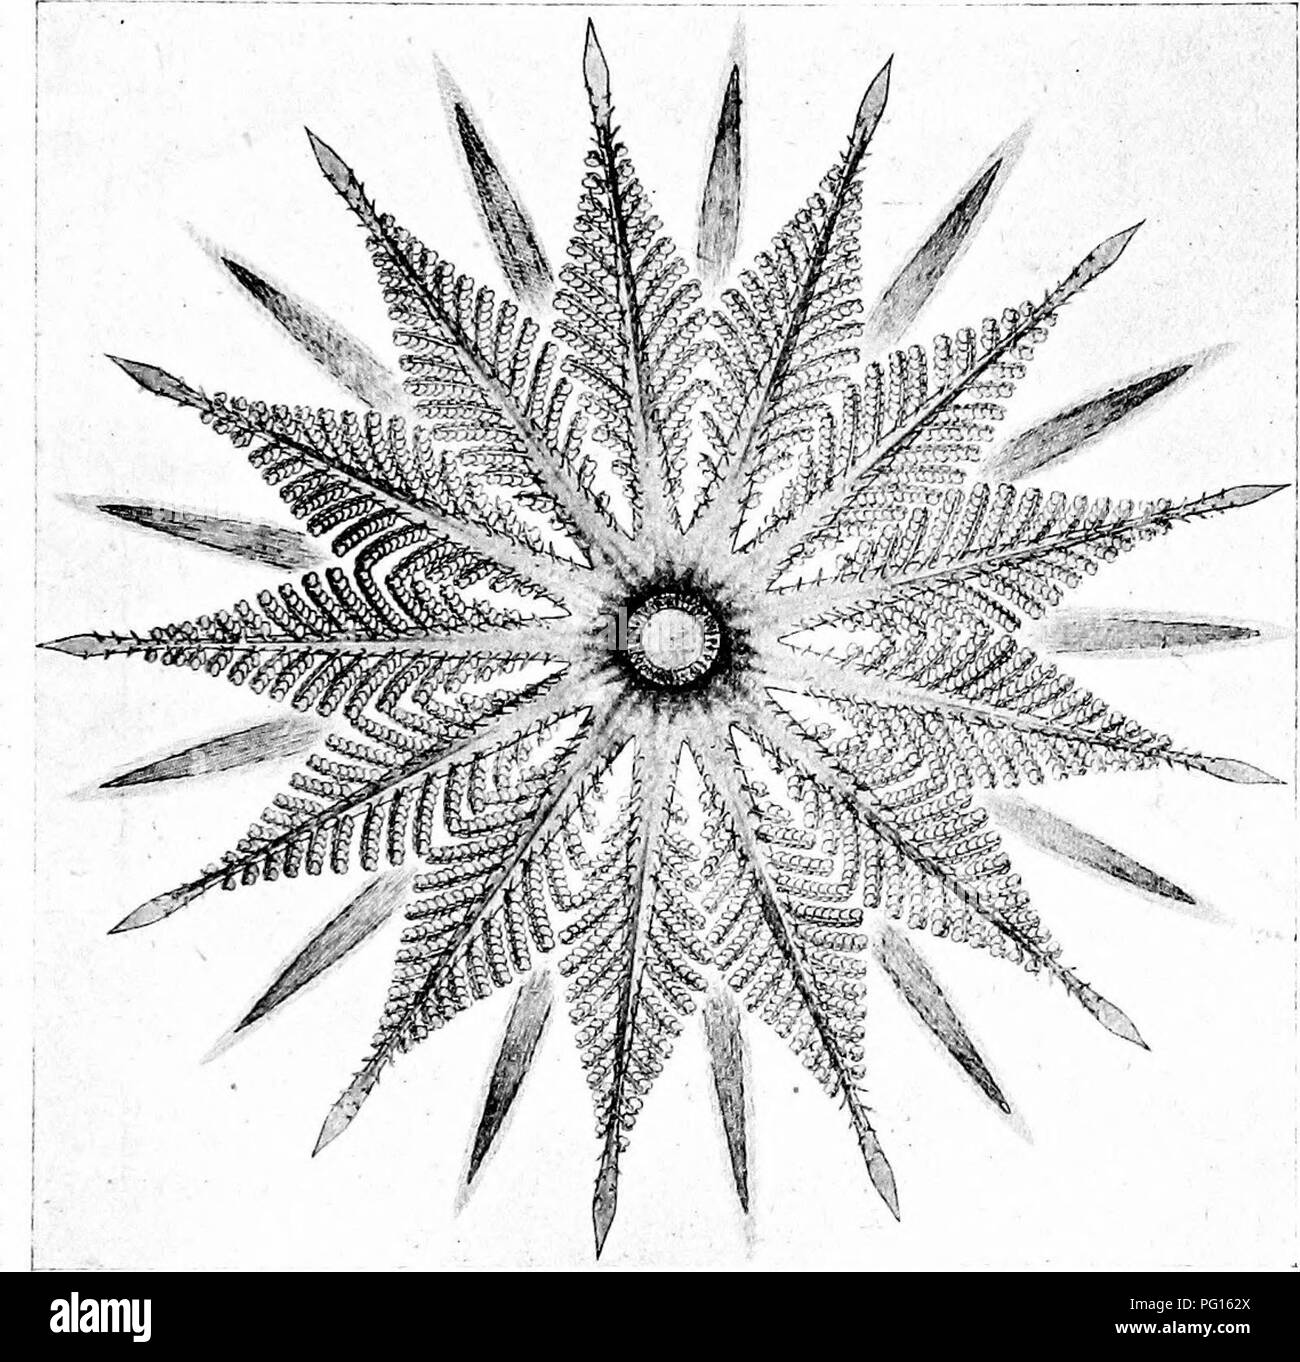 . Studies in fossil botany . Paleobotany. BENNETTITEAE 585 organisation of the whole flower is well shown in the diagrammatic figures 208 and 209, drawn by Dr. Wie- land to represent the flower in an expanded condition.. FlG, 209.—Cycctdeoidea ittgeus. — Plan of the bisexual flower, showing the central ovuliferous cone, the whorl of thirteen compound stamens, united at the base, and bearing synangia on their pinna;, and a series of the hairy bracts. The diagram is •about on the same scale as Fig. 208, and shows the flower as it would appear, seen from above, if all its parts were fully expande Stock Photo